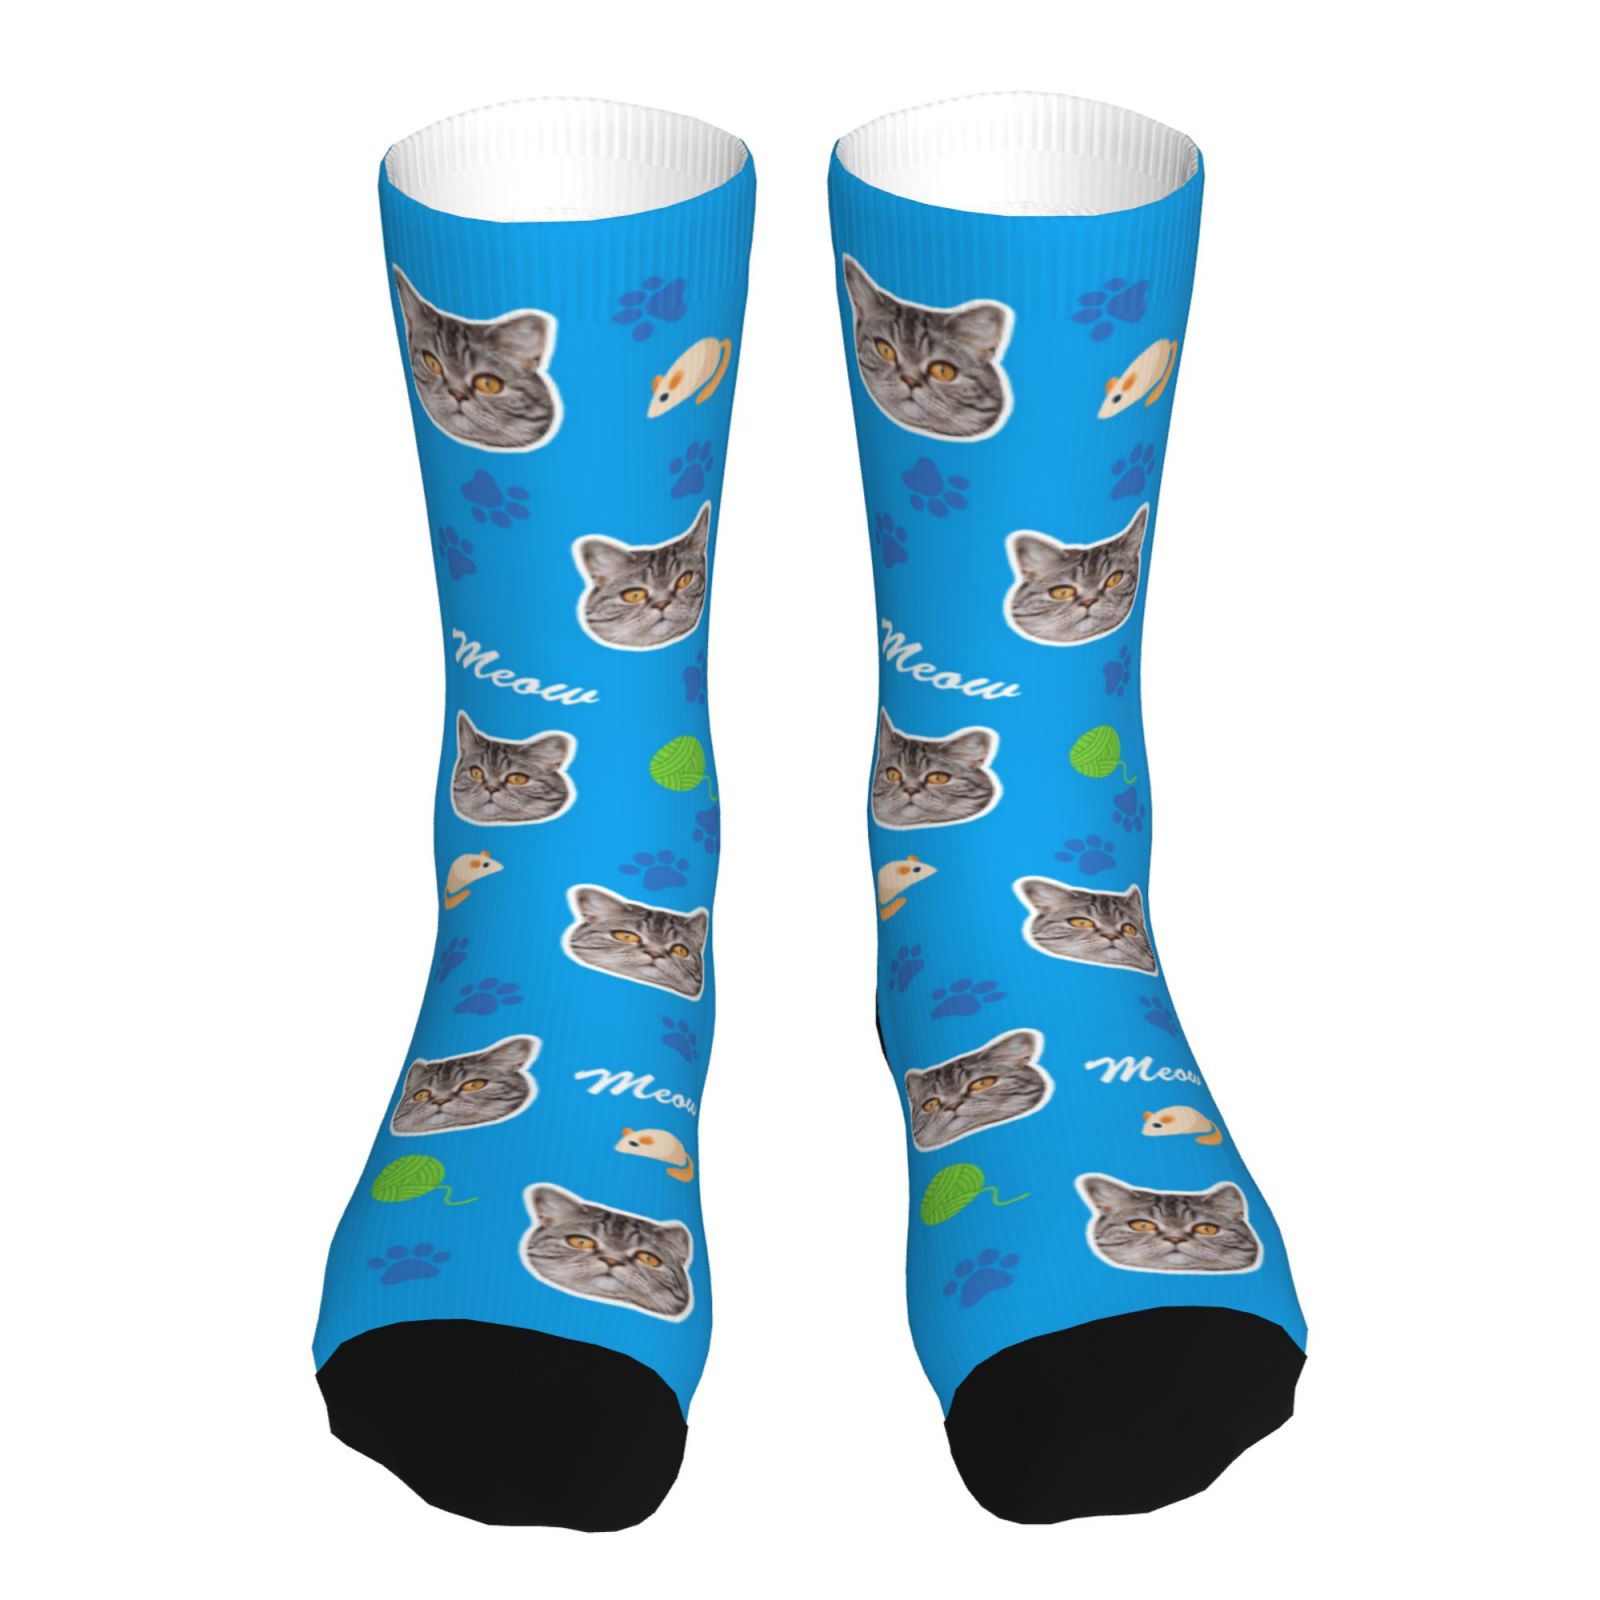 Custom Cat Face Socks with Paws and Mouse